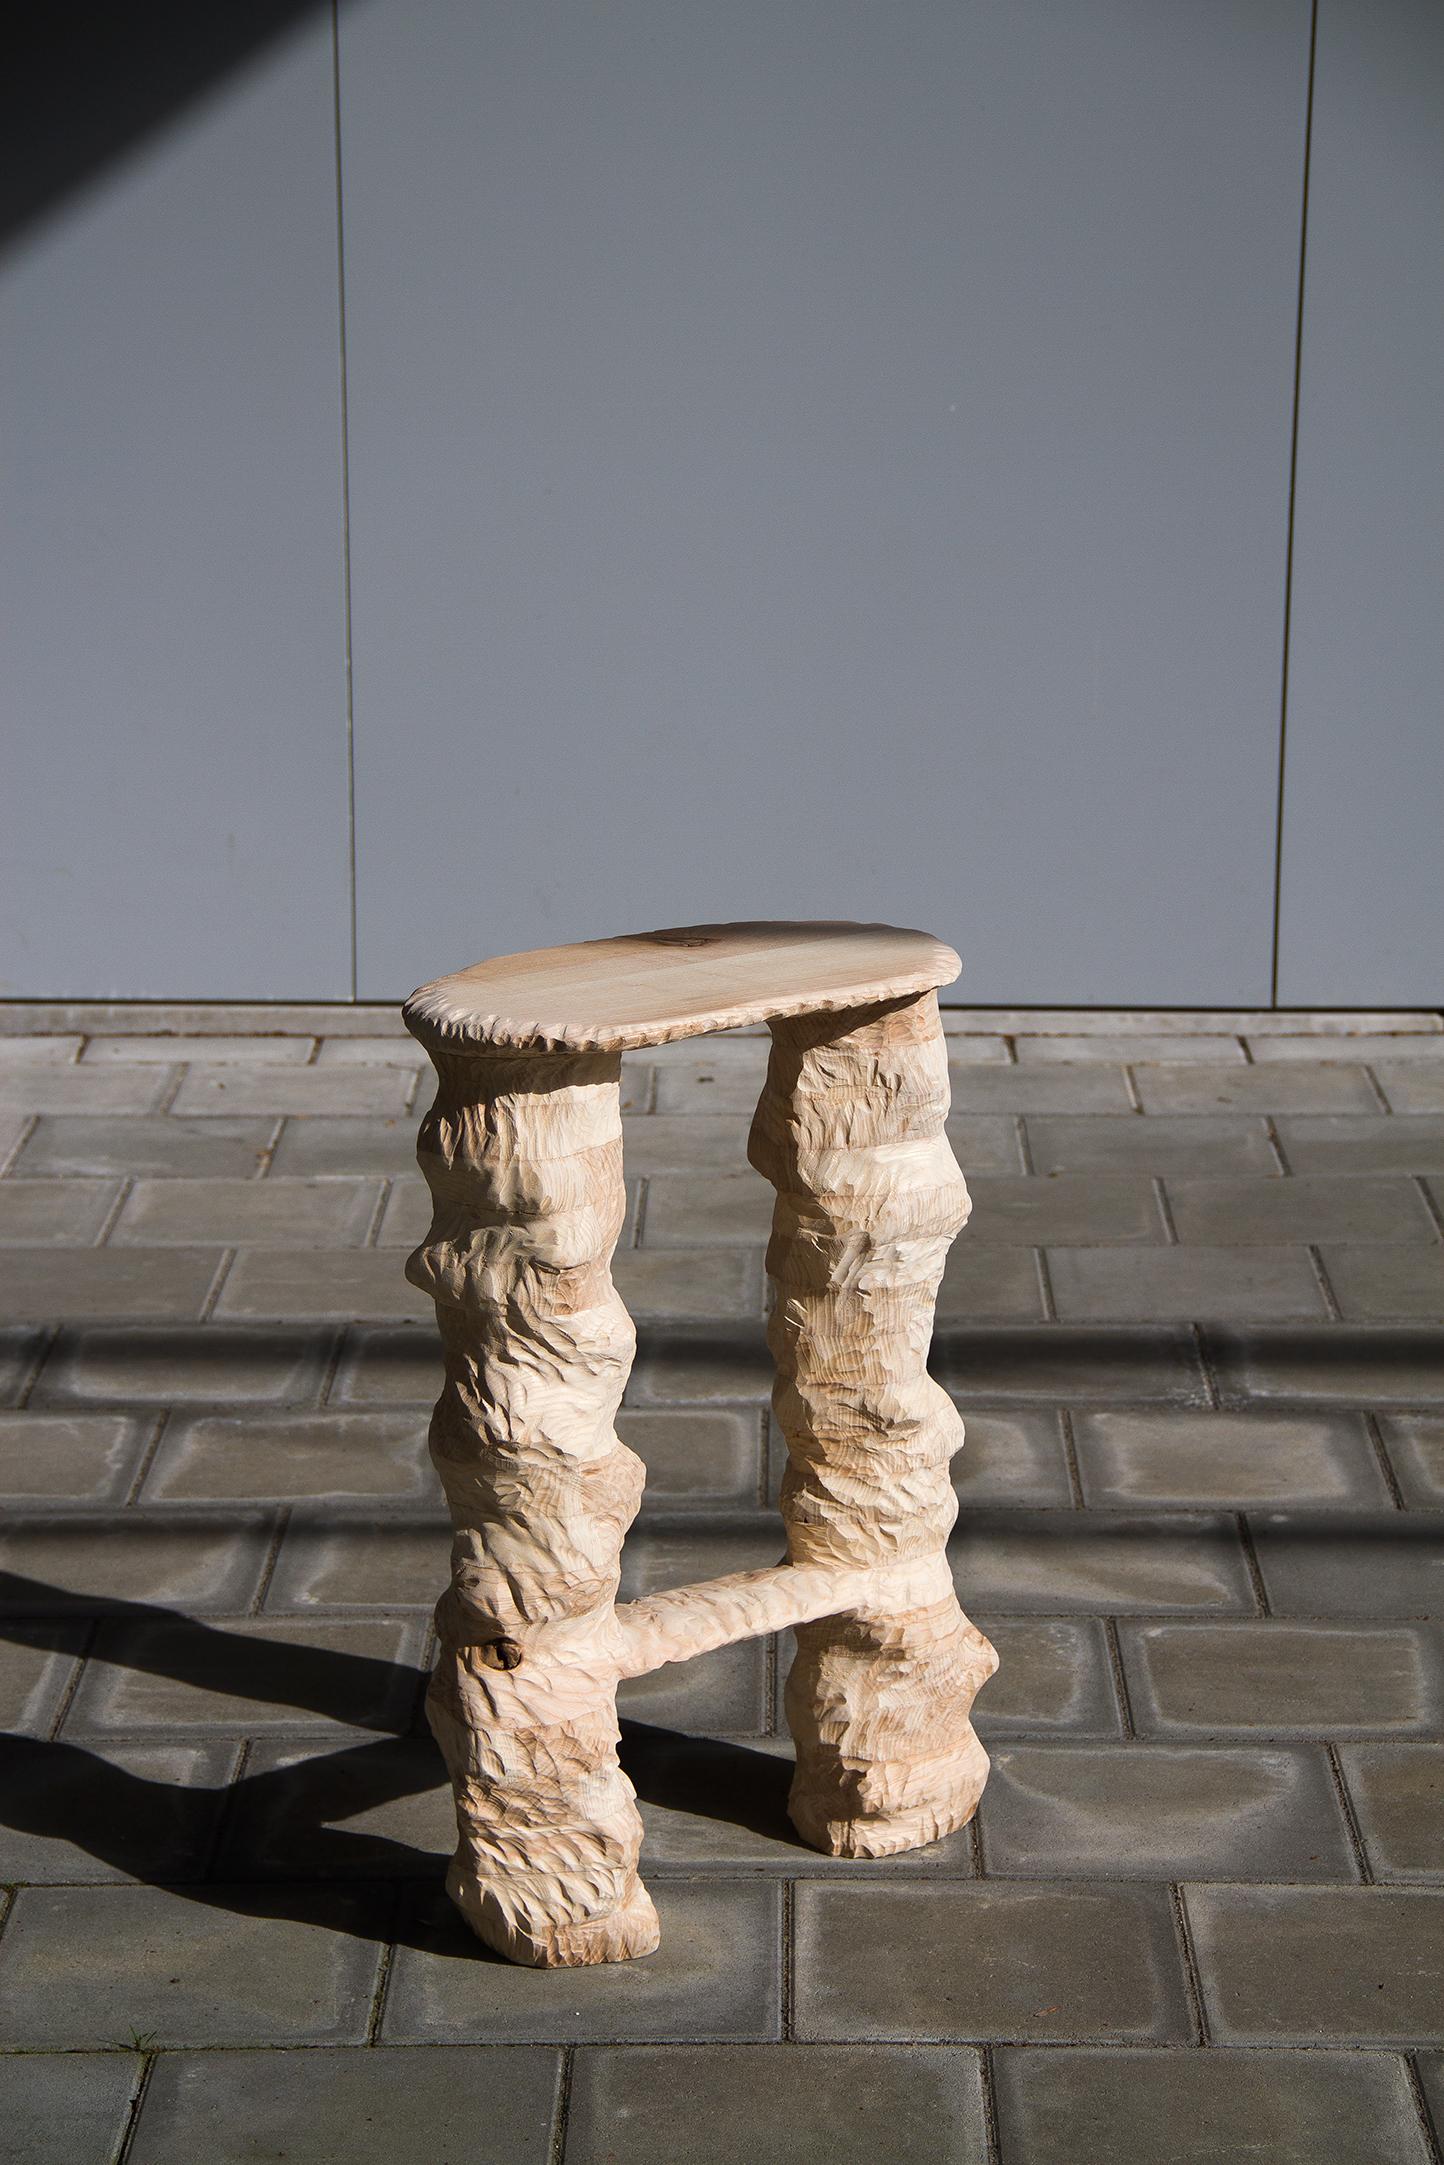 Series of stools designed and handcrafted in the Netherlands by Tellurico Design Studio using only high-quality woods. 
The three stools are inspired by the ancient technique of wood carving and adapted to the contemporary aesthetic. This